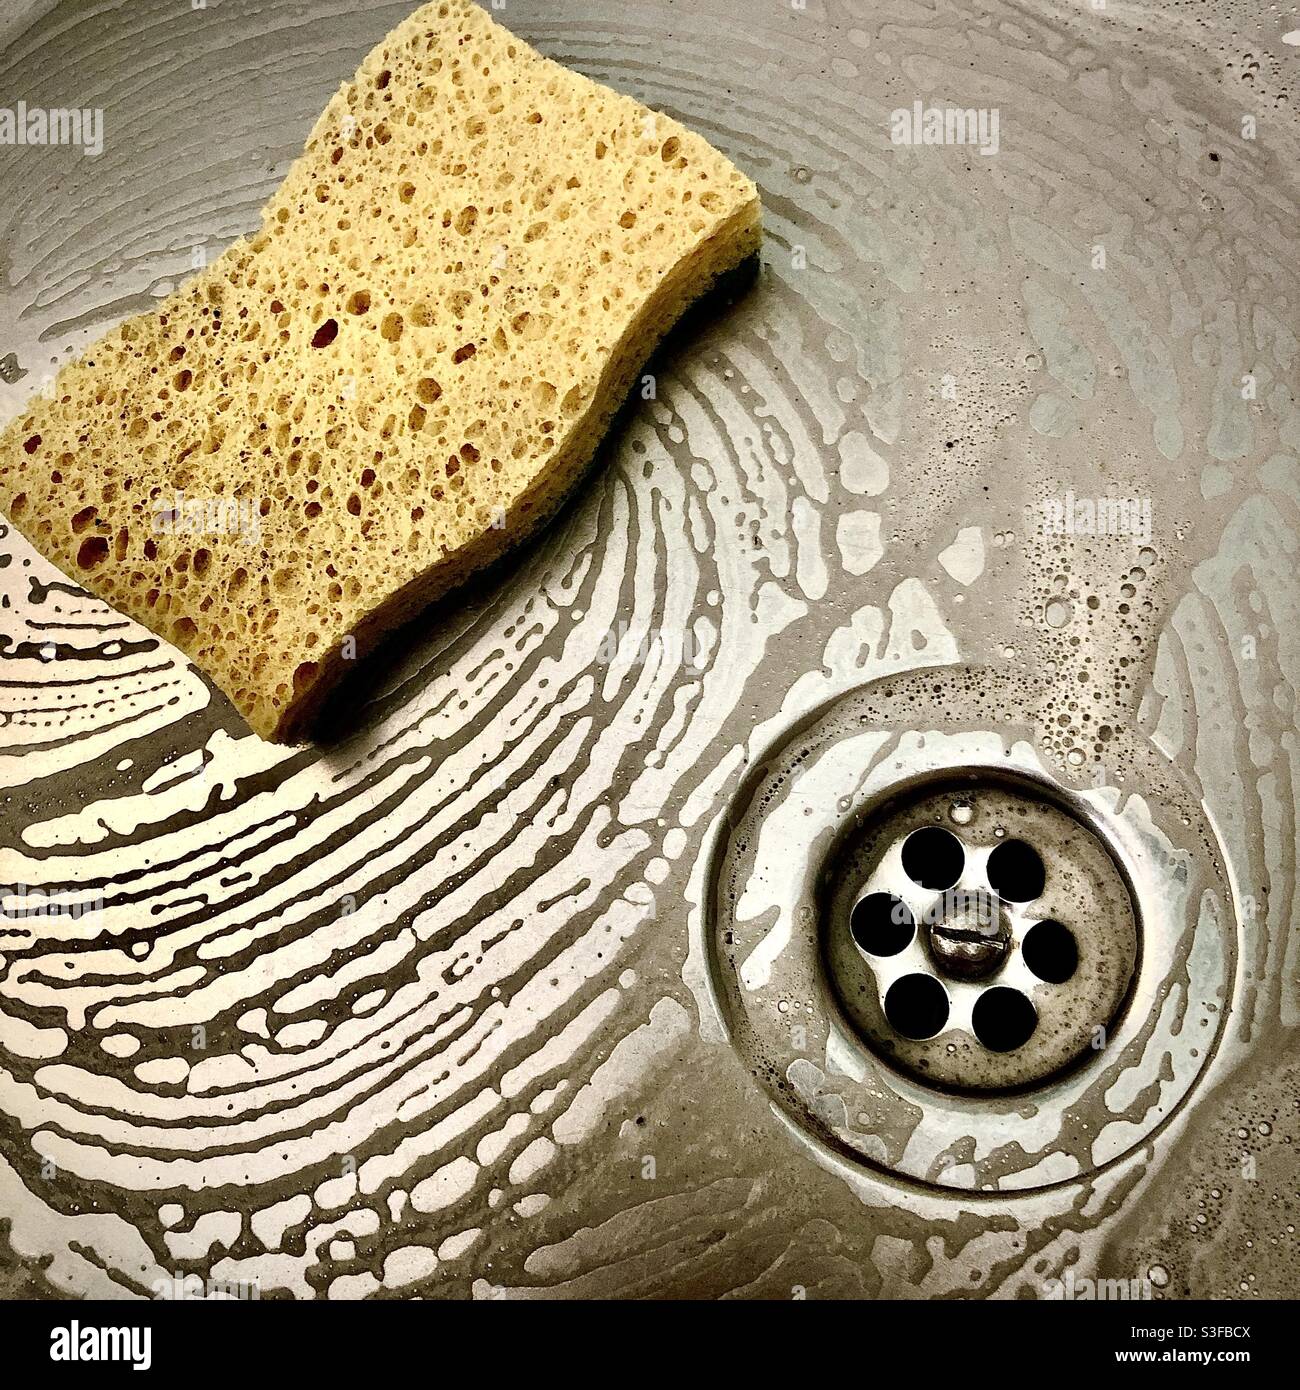 Cleaning stainless steel kitchen sink. Stock Photo